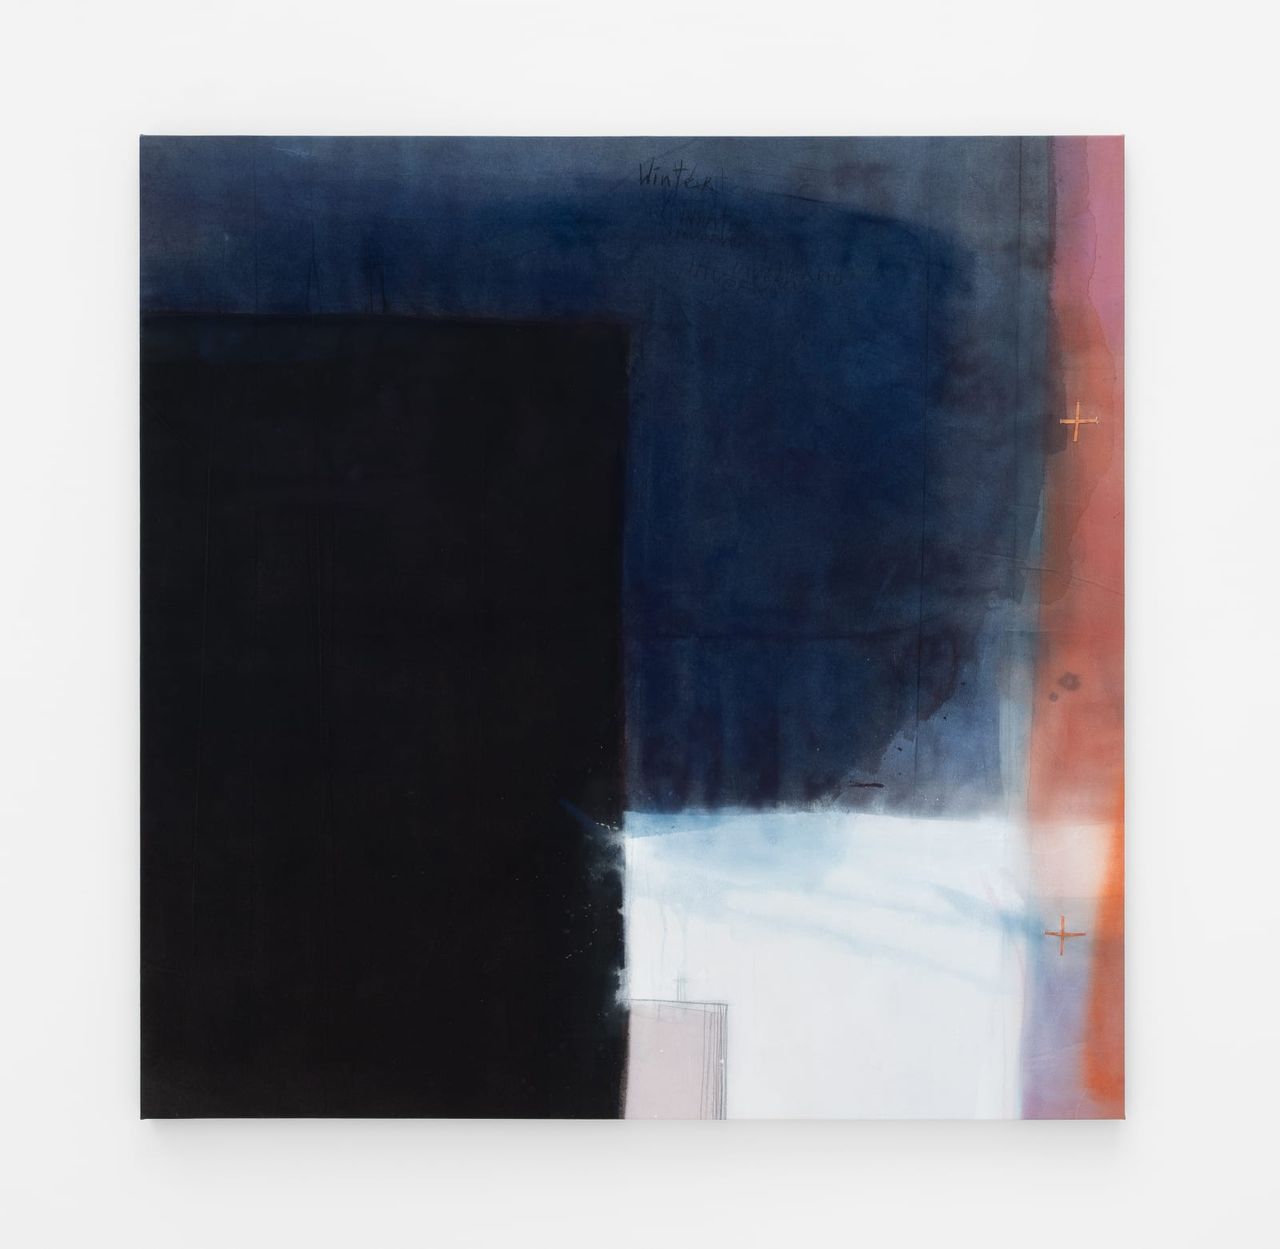 Winter, 2019 | Copper, rainwater, charcoal and pigments in acrylic resin on canvas 159 x 160 cm